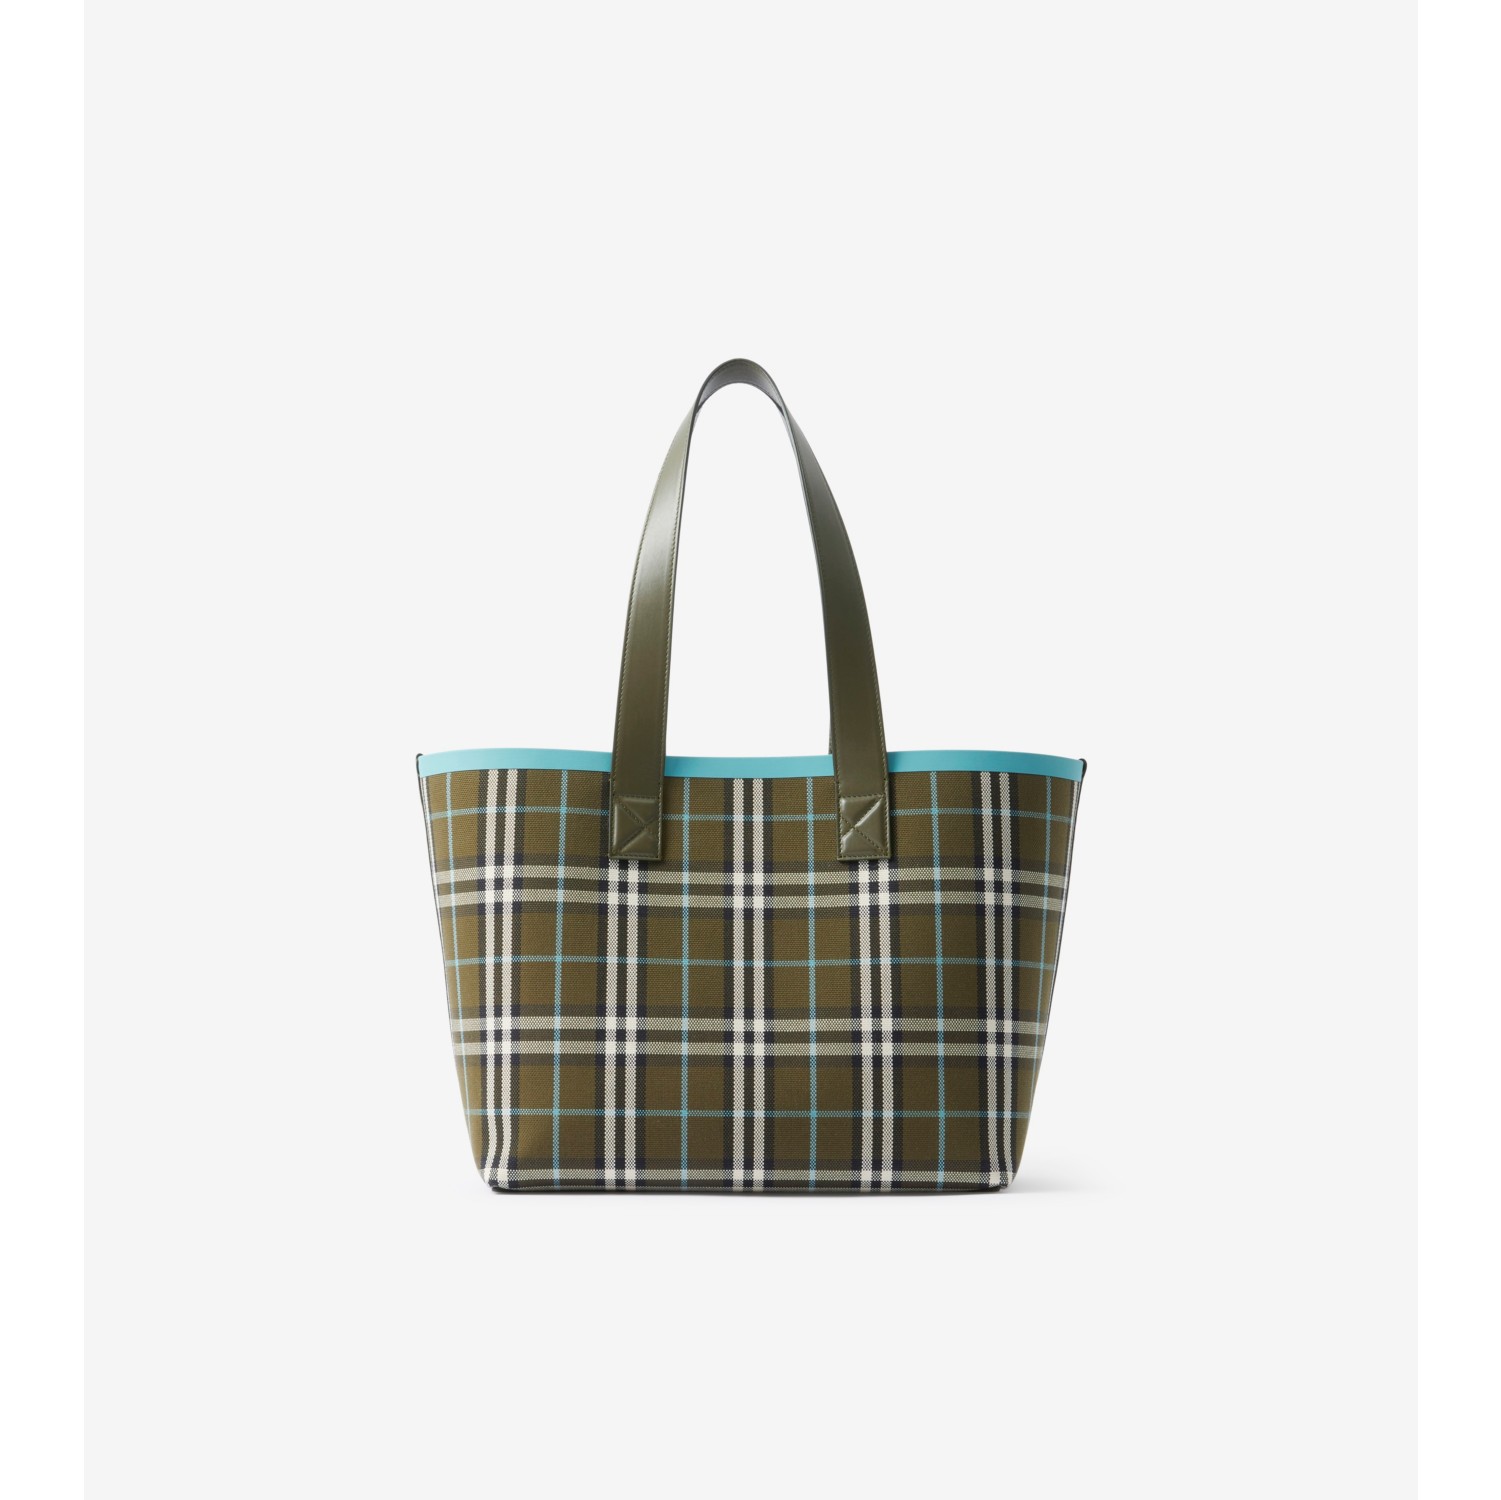 Women's London Tote Bag by Burberry